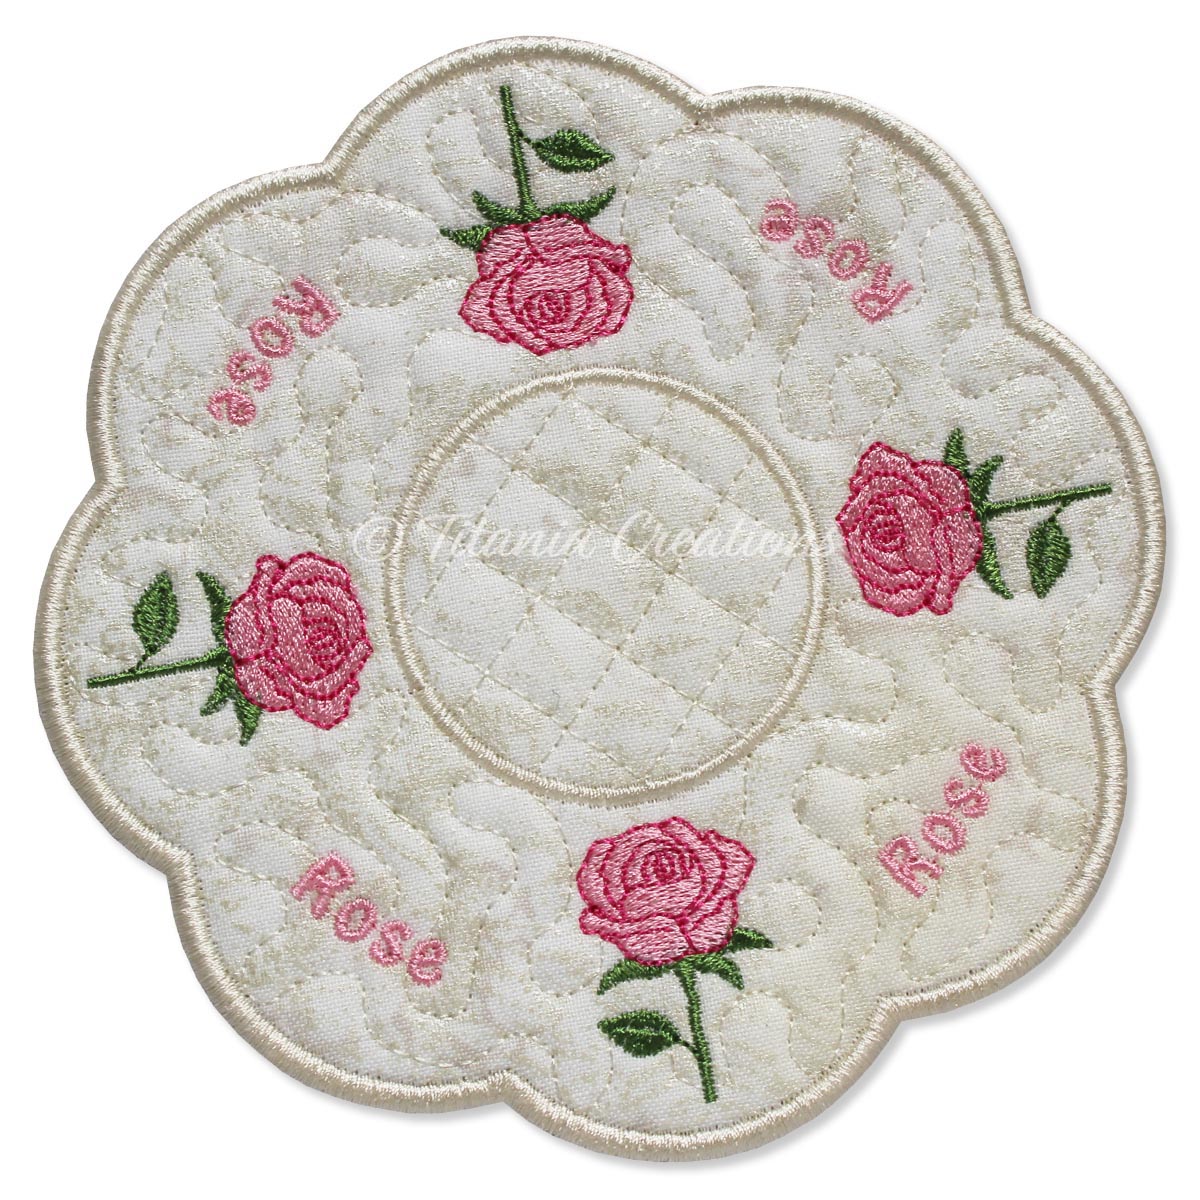 ITH Rose Flower for June Candle Mat 5x5 6x6 7x7 8x8